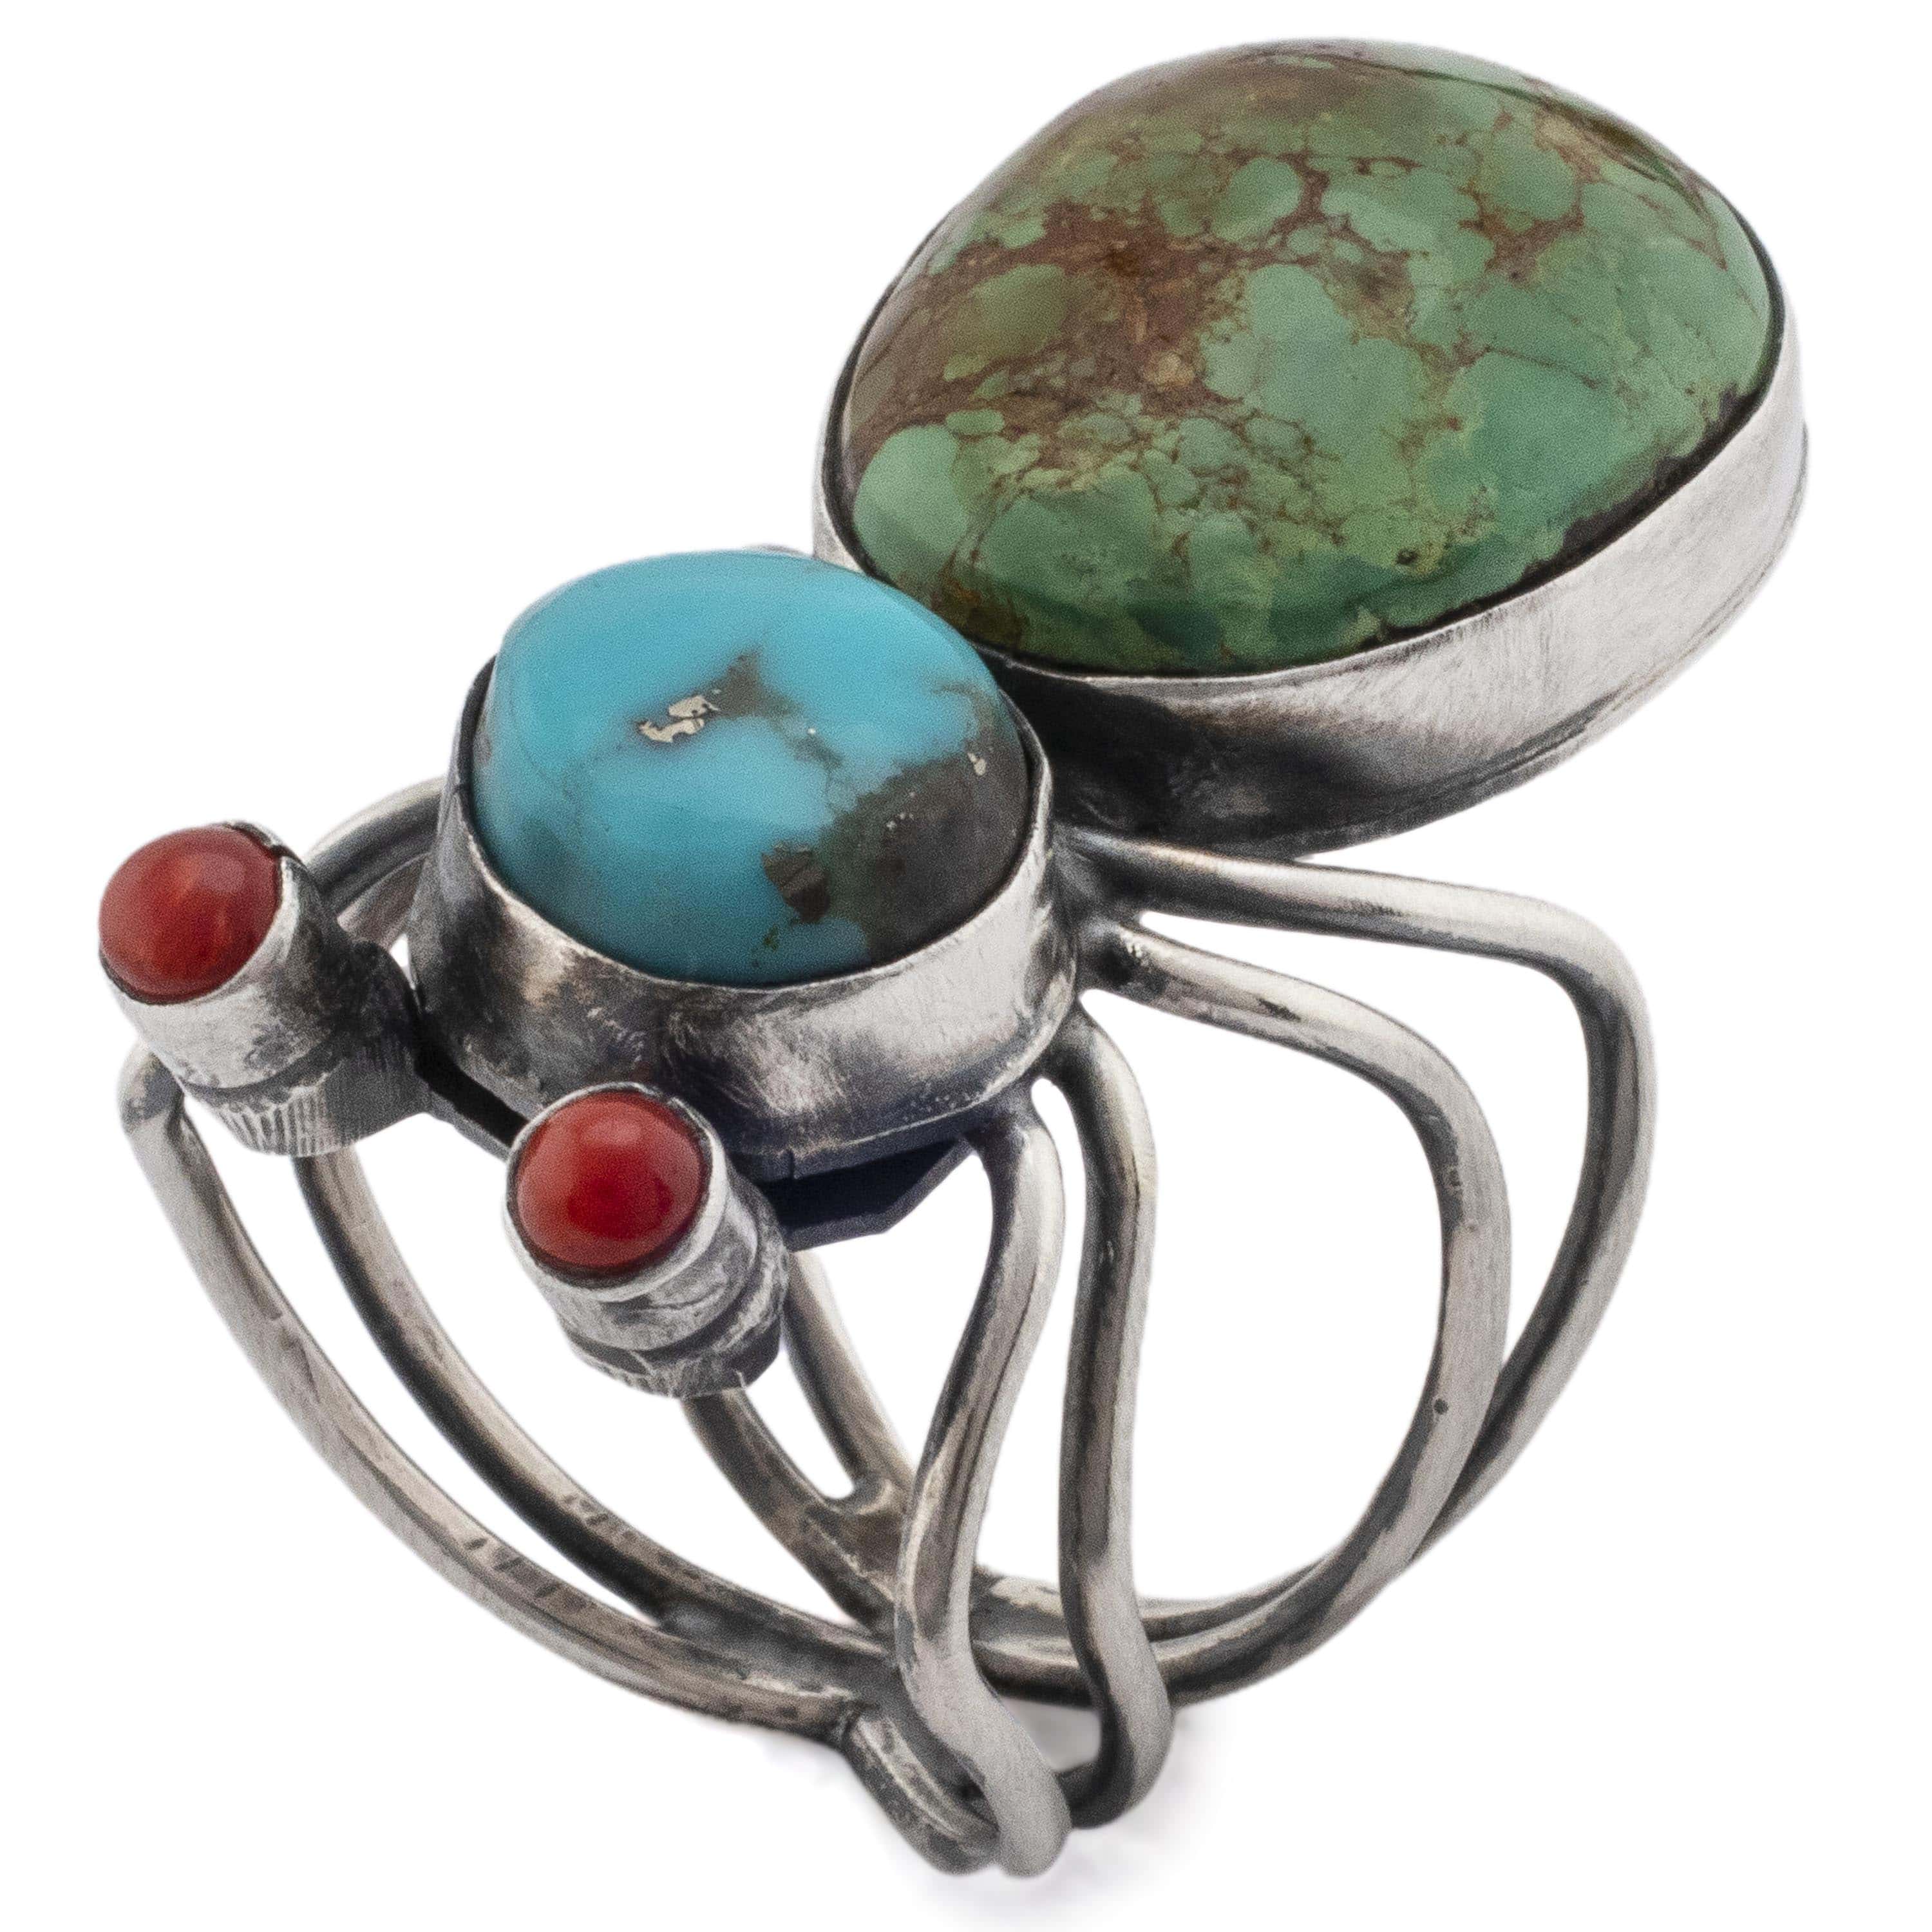 Kalifano Native American Jewelry 8 Herbert Ration Kingman Turquoise and Coral Spider USA Native American Made 925 Sterling Silver Ring NAR2400.005.8